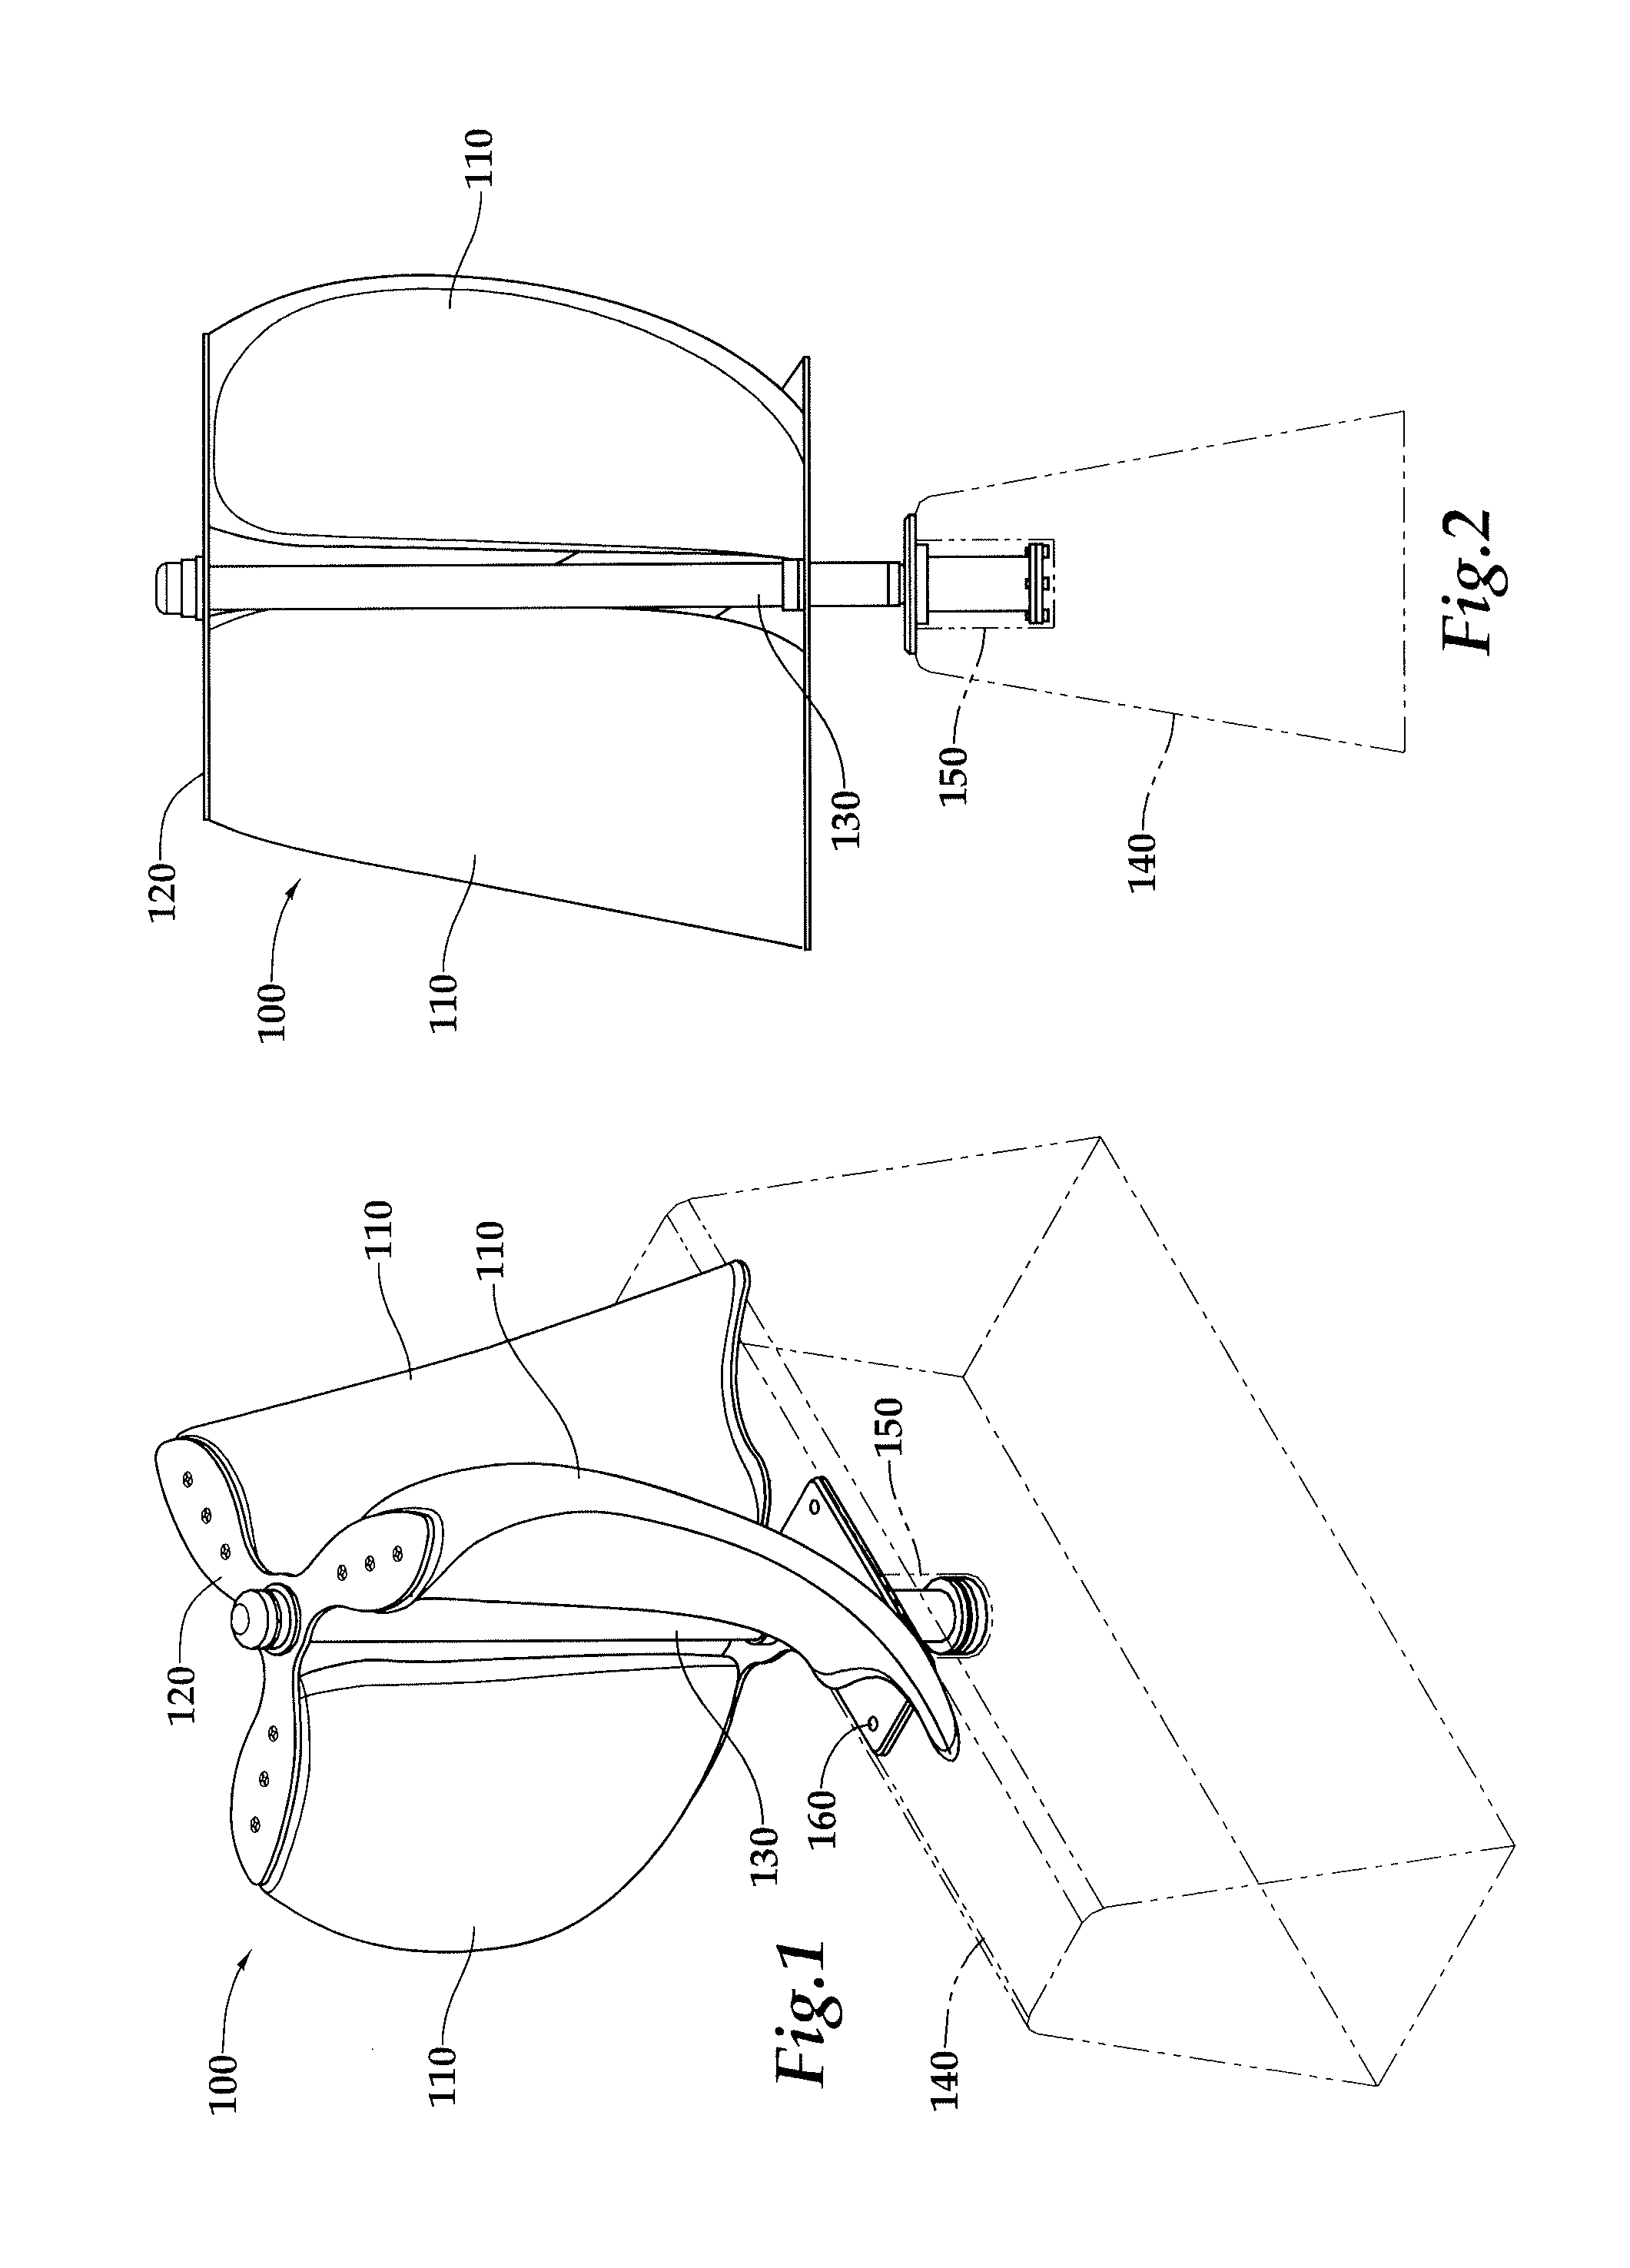 Wind power generation system and method